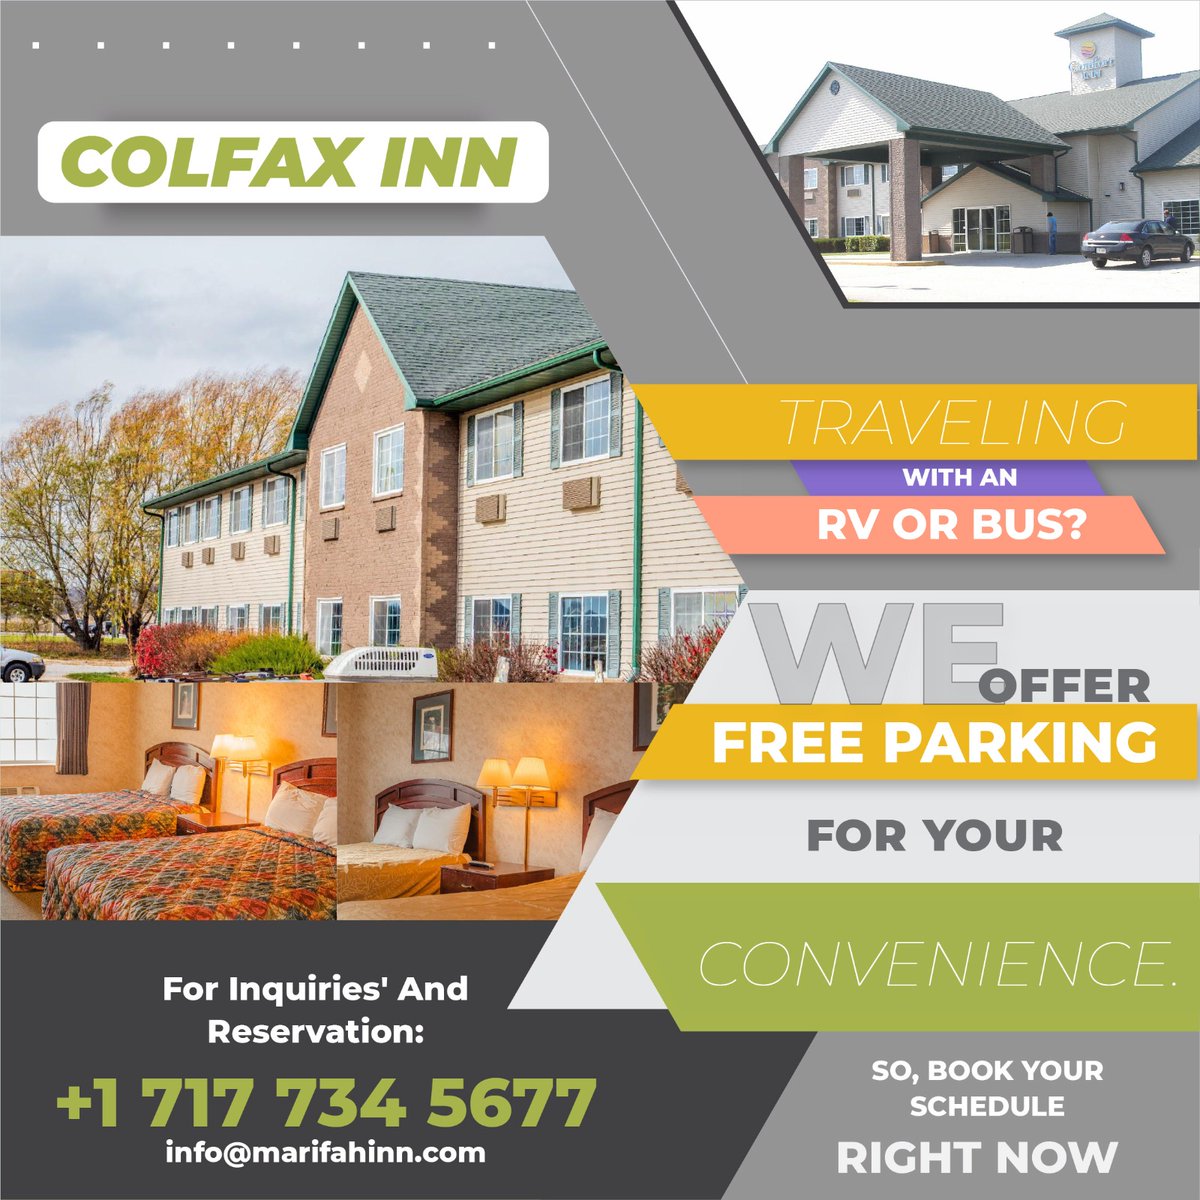 Calling all road warriors! Colfax Inn offers complimentary parking for RVs and buses. Book your stay today and relax in comfort.
Visit Us: marifahinn.com/website/hotelD…
#ColfaxInn #RVTravel #BusTravel #ParkForFree #RoadTrip #TravelInStyle #ComfortOnTheRoad #HassleFreeStay #RVLife